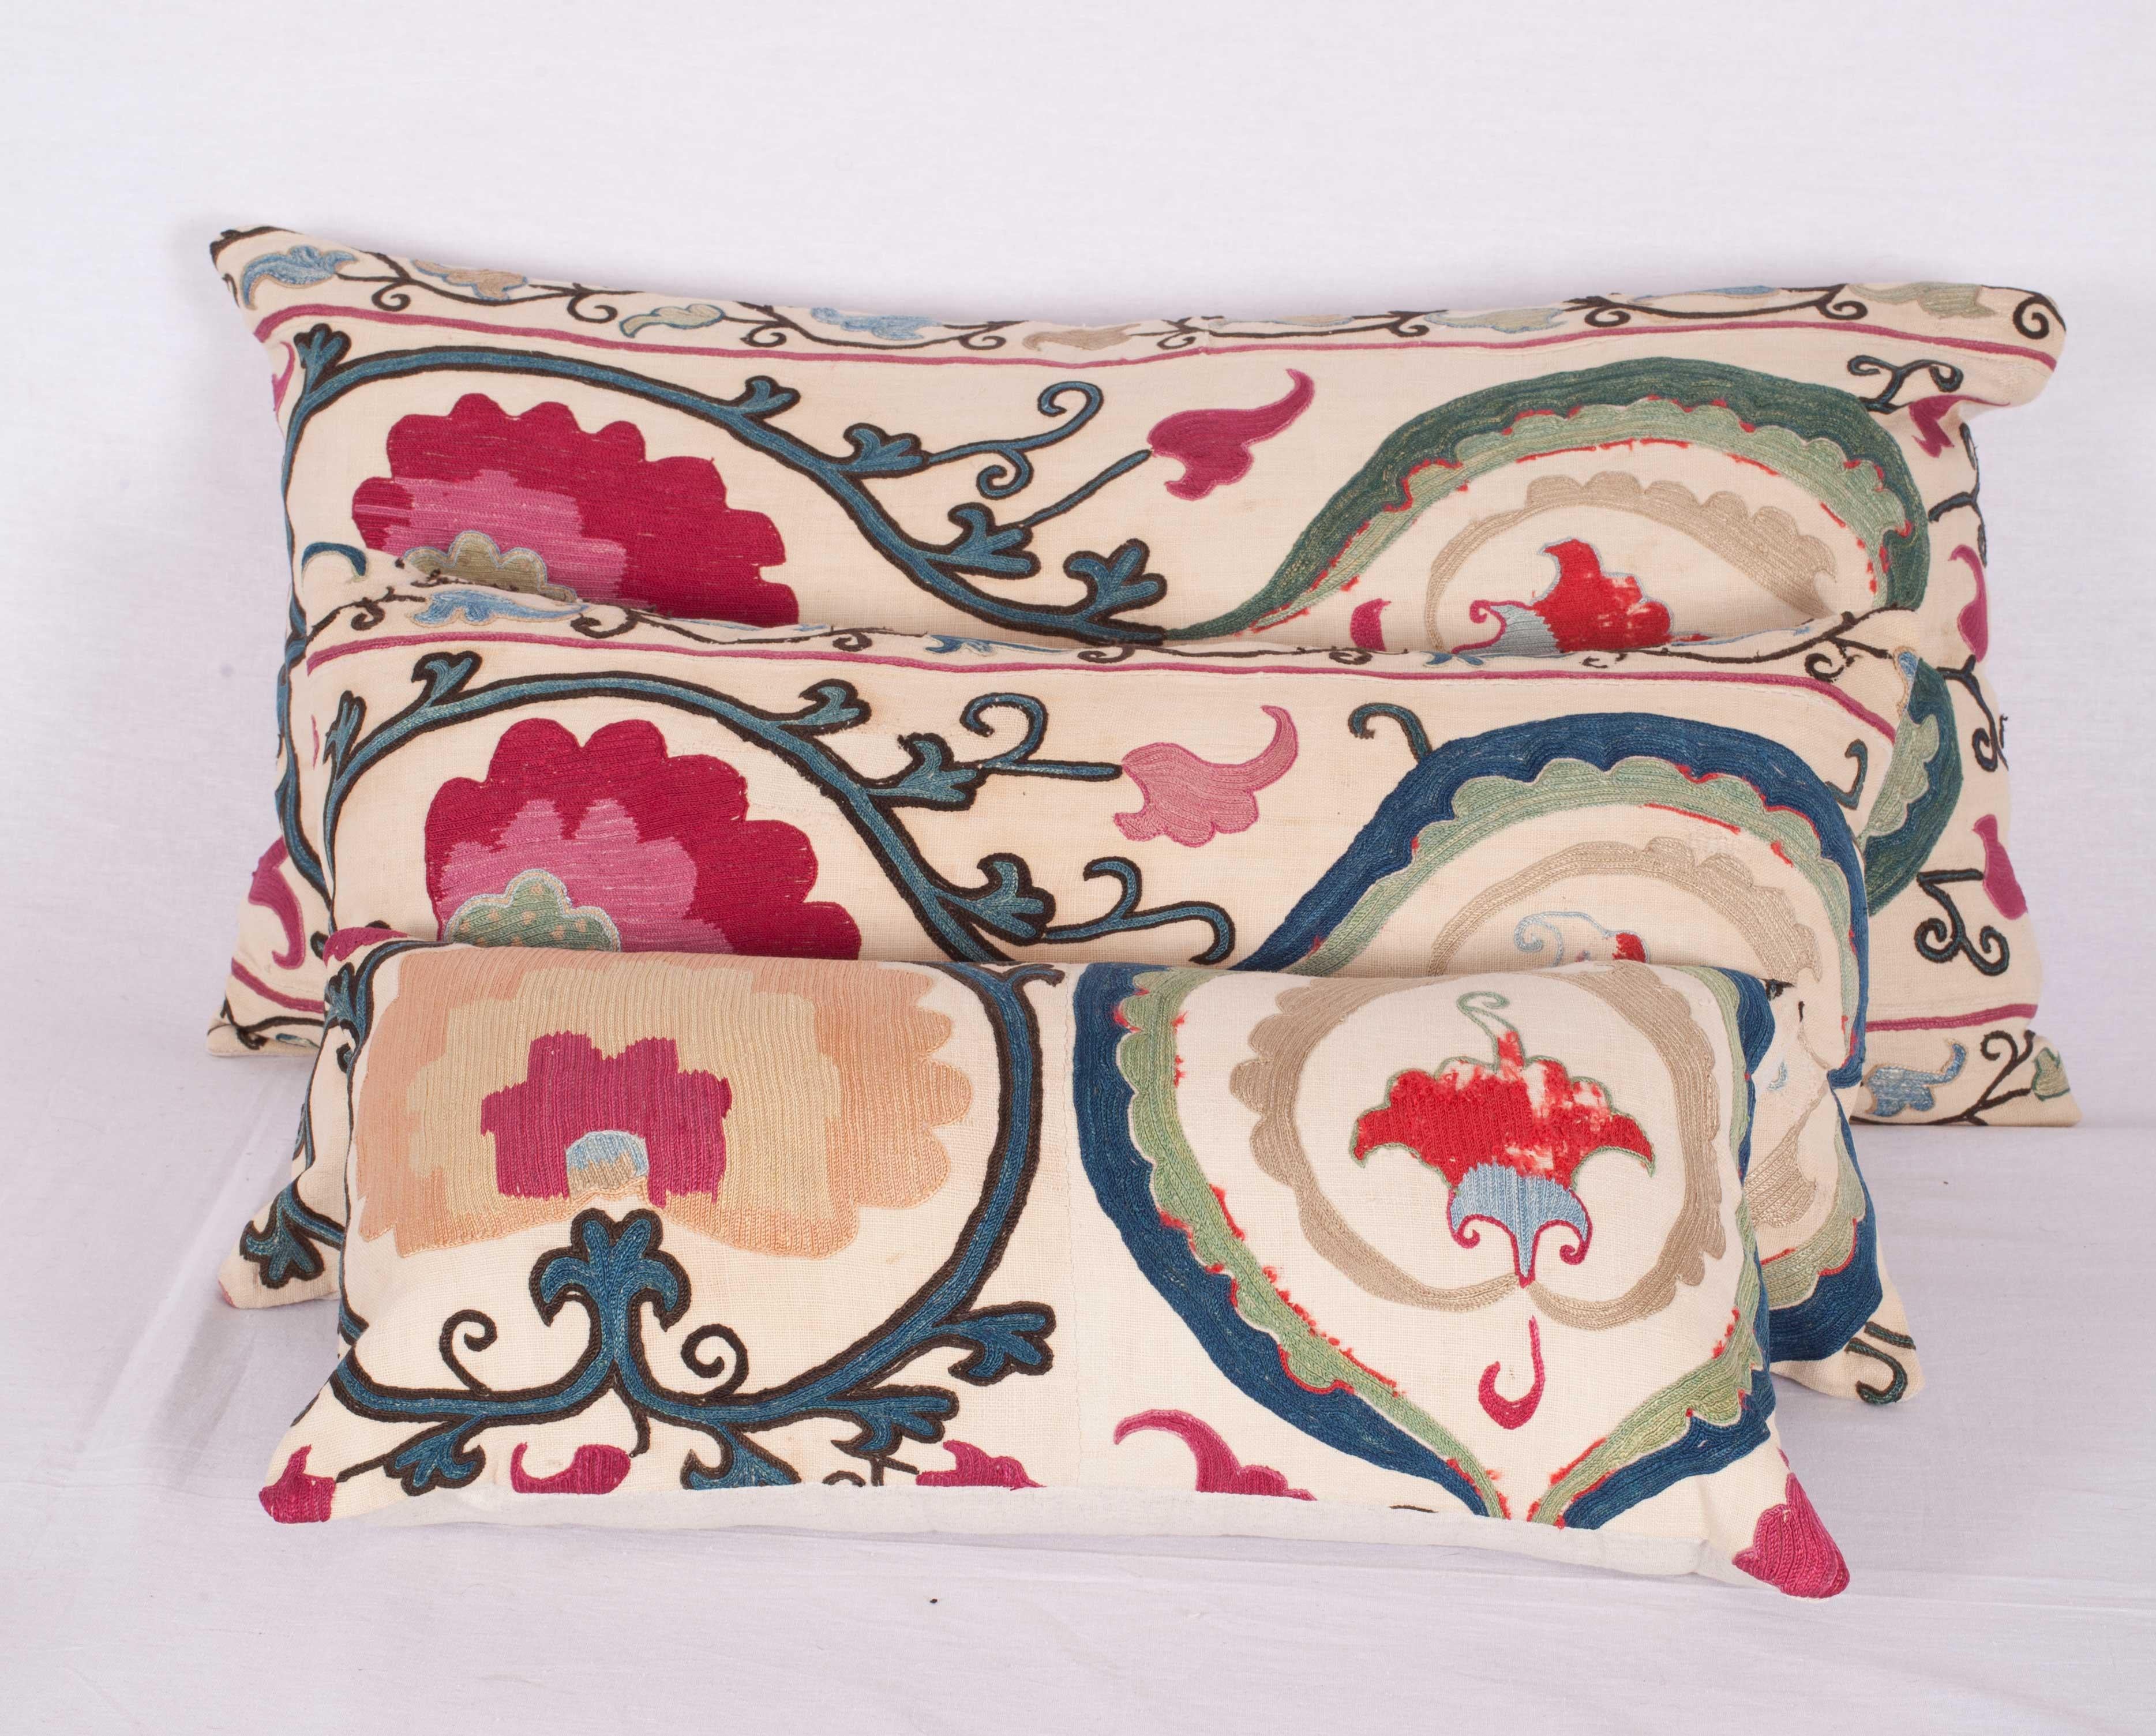 The pillow cases are made from an antique Uzbek Suzani from Bukhara. It is silk embroidery on a handwoven cotton field. The backing is pure linen, and they do not come with inserts but bags made to the size in cotton to accommodate insert materials.